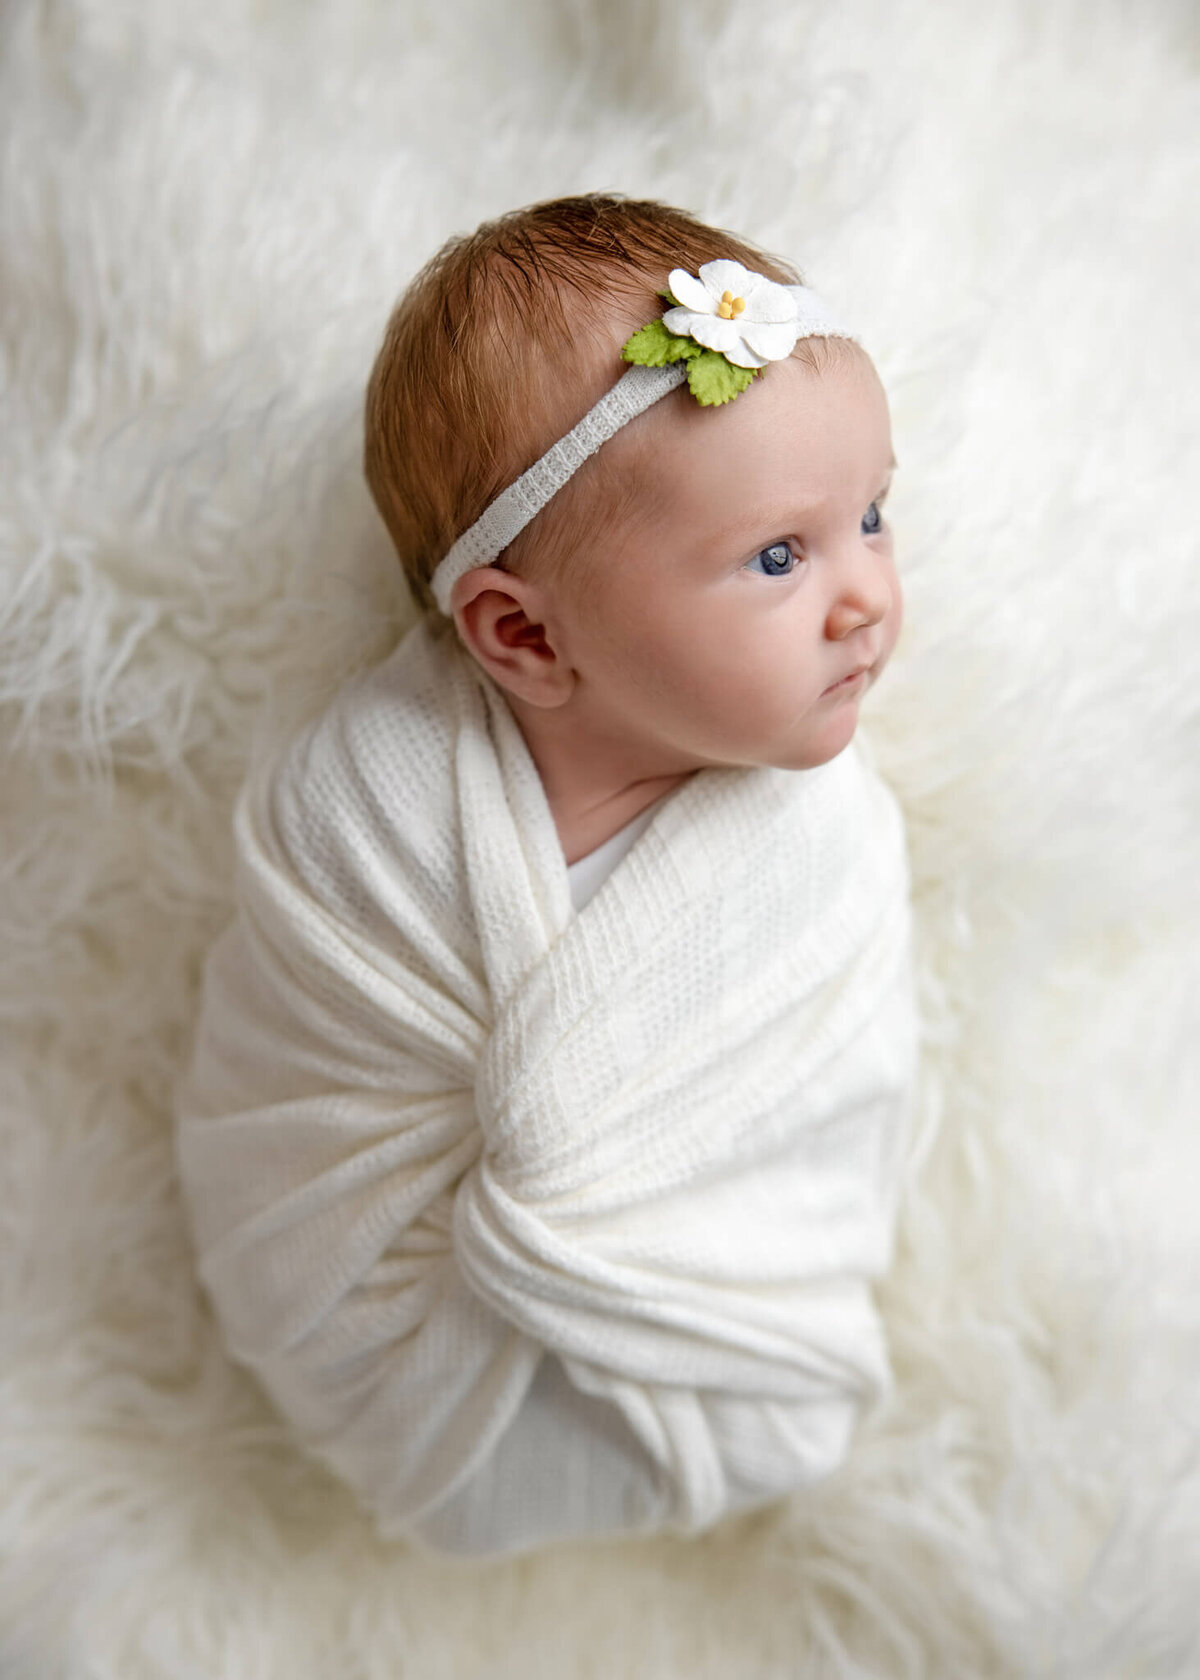 side profile of awake newborn baby wrapped in white fabric wearing a floral headband laying on a white shaggy rug